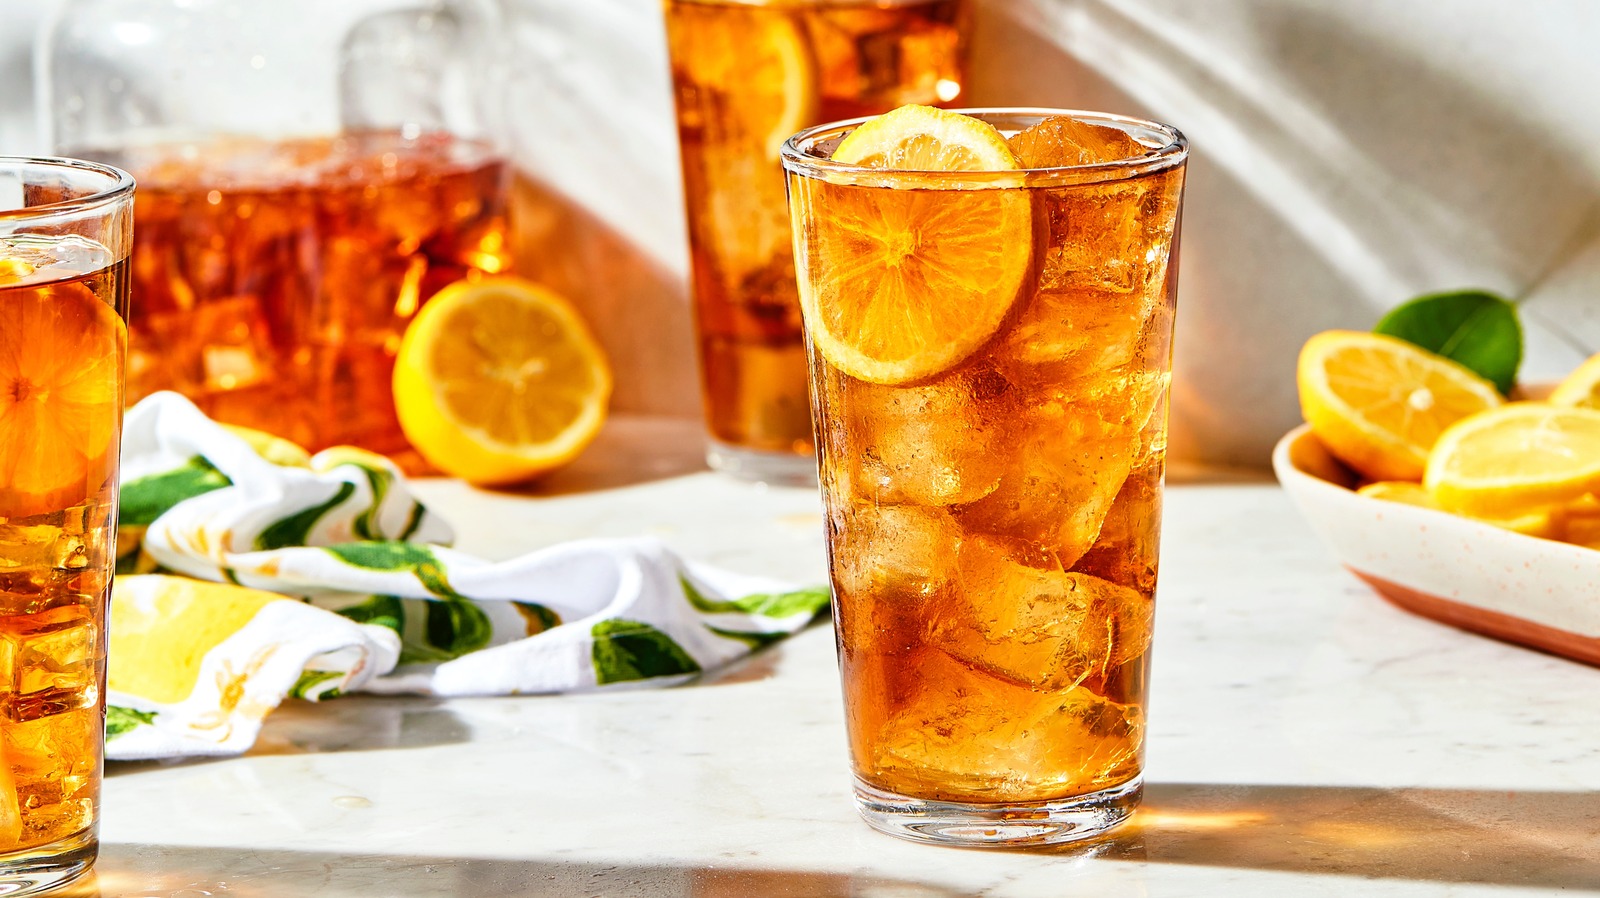 https://www.tastingtable.com/img/gallery/what-to-consider-when-buying-a-manual-iced-tea-maker/l-intro-1694668705.jpg